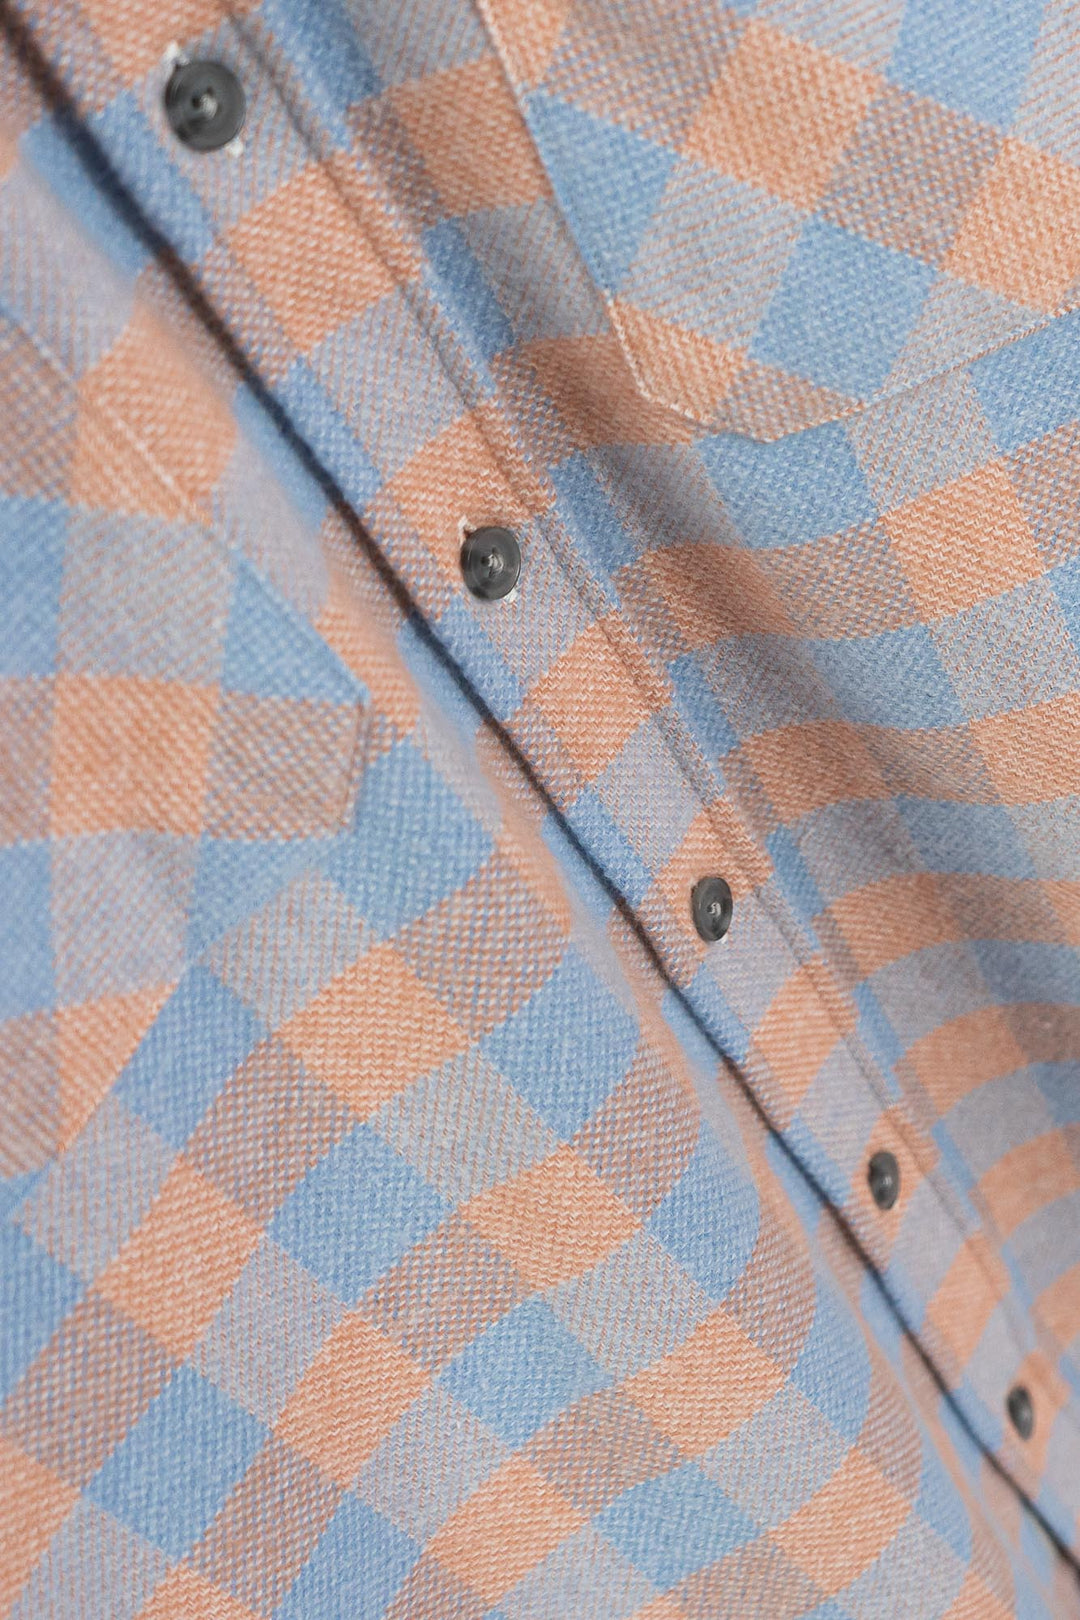 Grand Flannel in Tangerine Orange and Blue Check, Cotton Flannel Shirt for Men by MuskOx